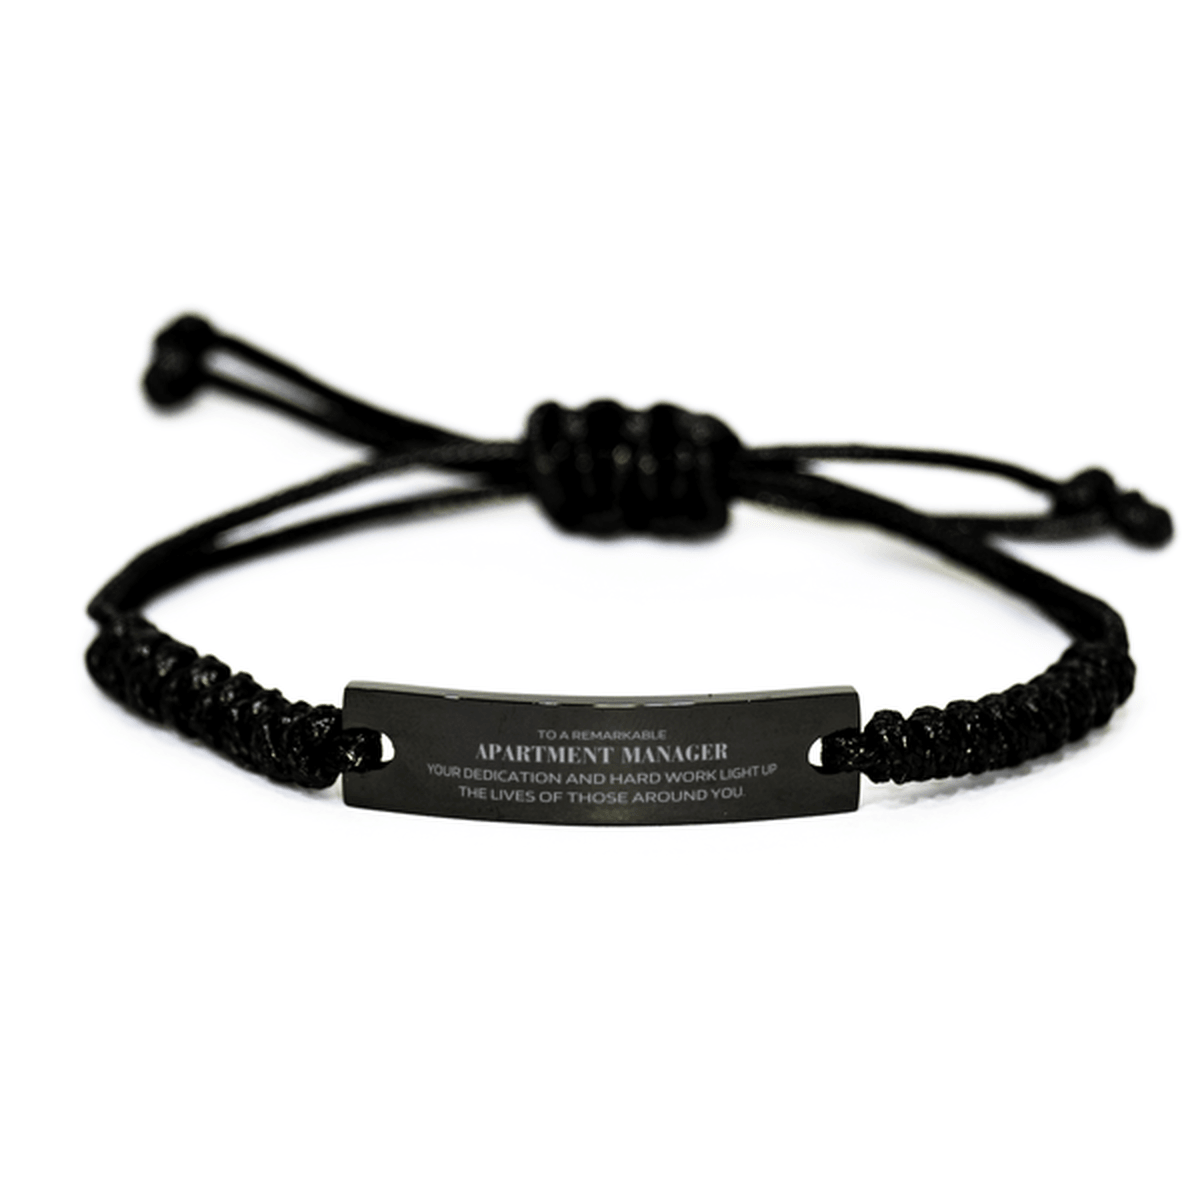 Remarkable Apartment Manager Gifts, Your dedication and hard work, Inspirational Birthday Christmas Unique Black Rope Bracelet For Apartment Manager, Coworkers, Men, Women, Friends - Mallard Moon Gift Shop